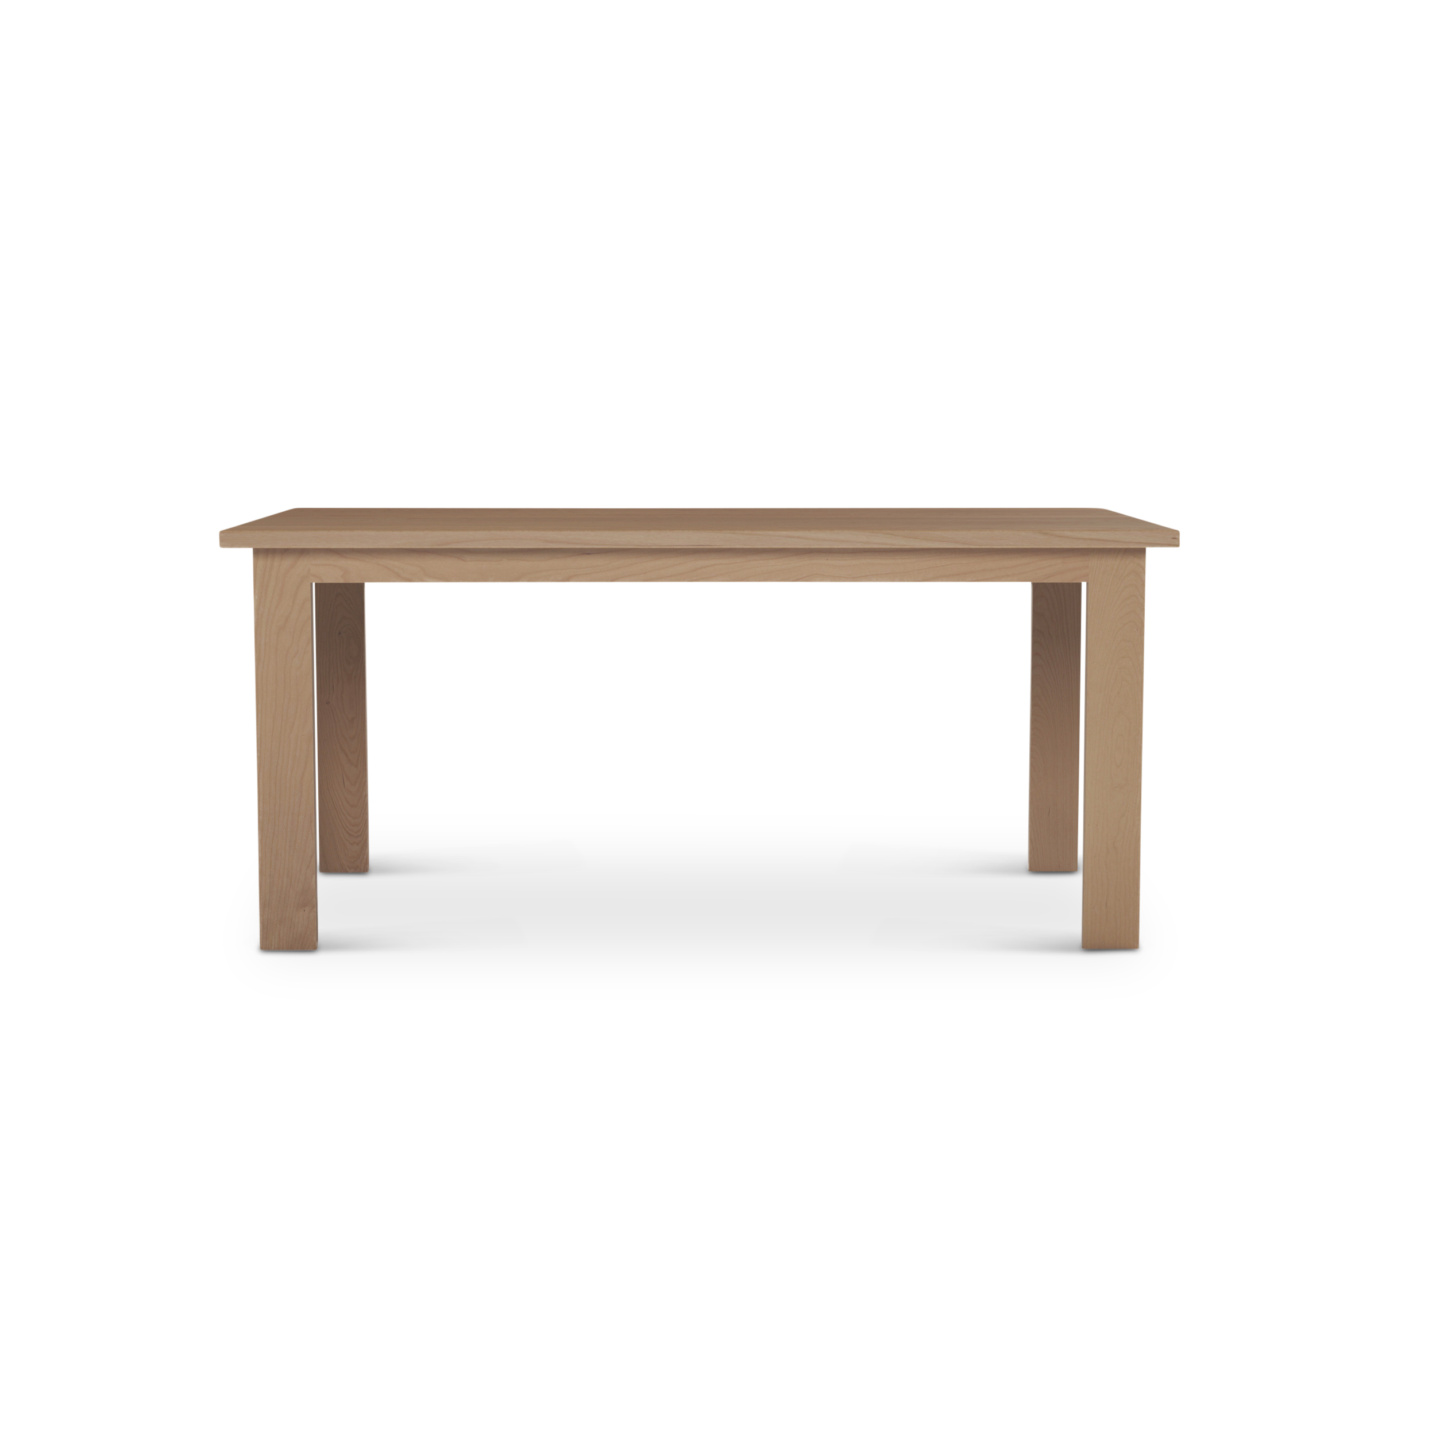 Scandinavian style cherry table made in Ohio